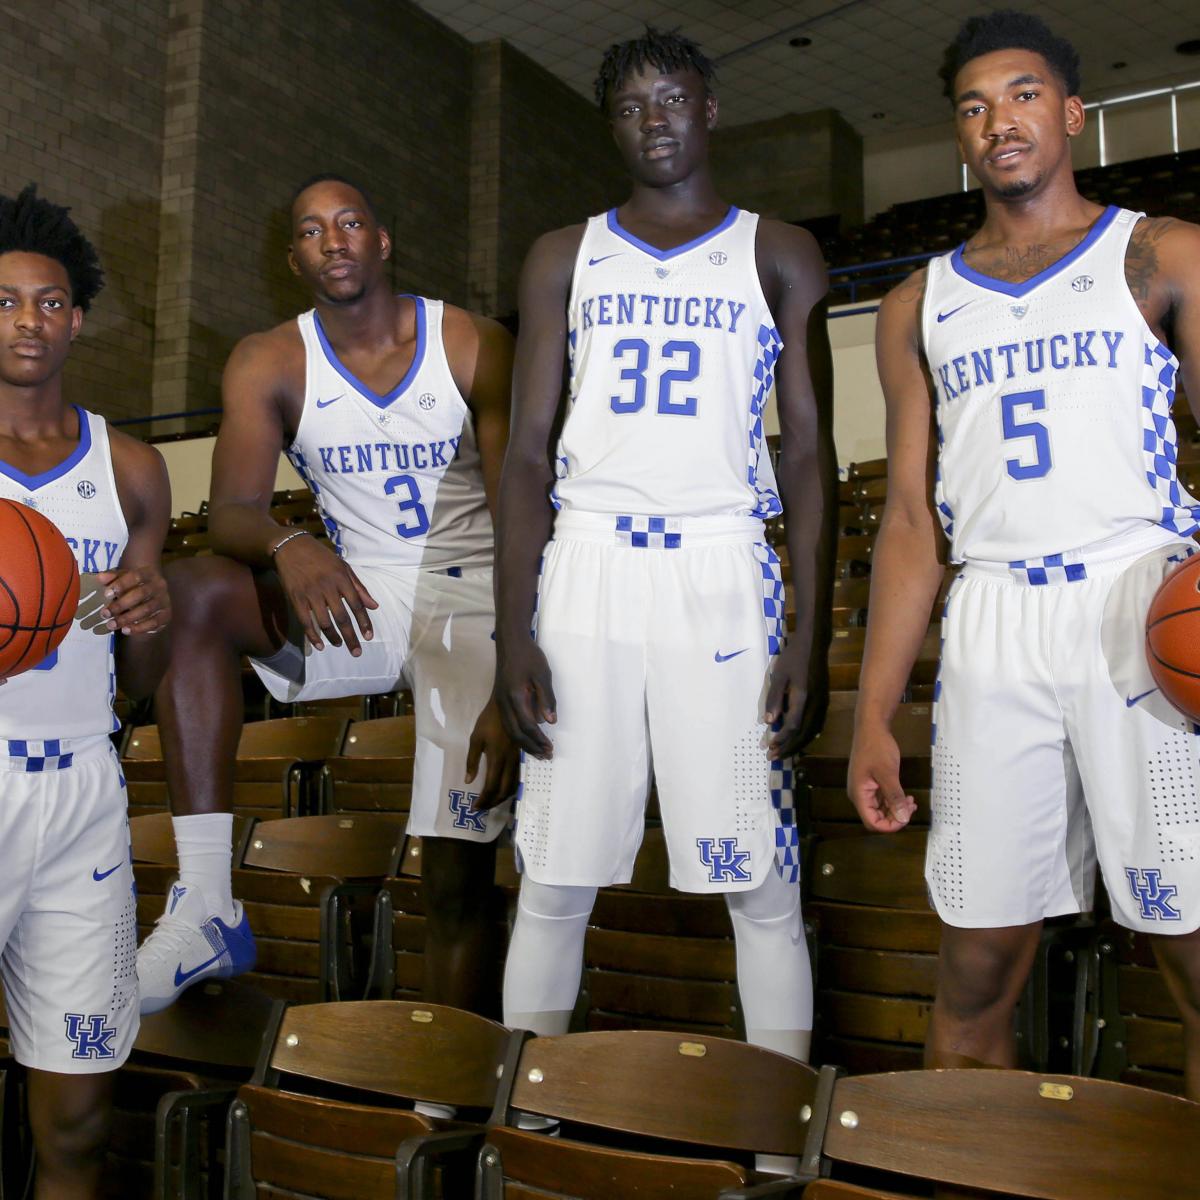 Kentucky's Five Freshman Looking to Separate Themselves From